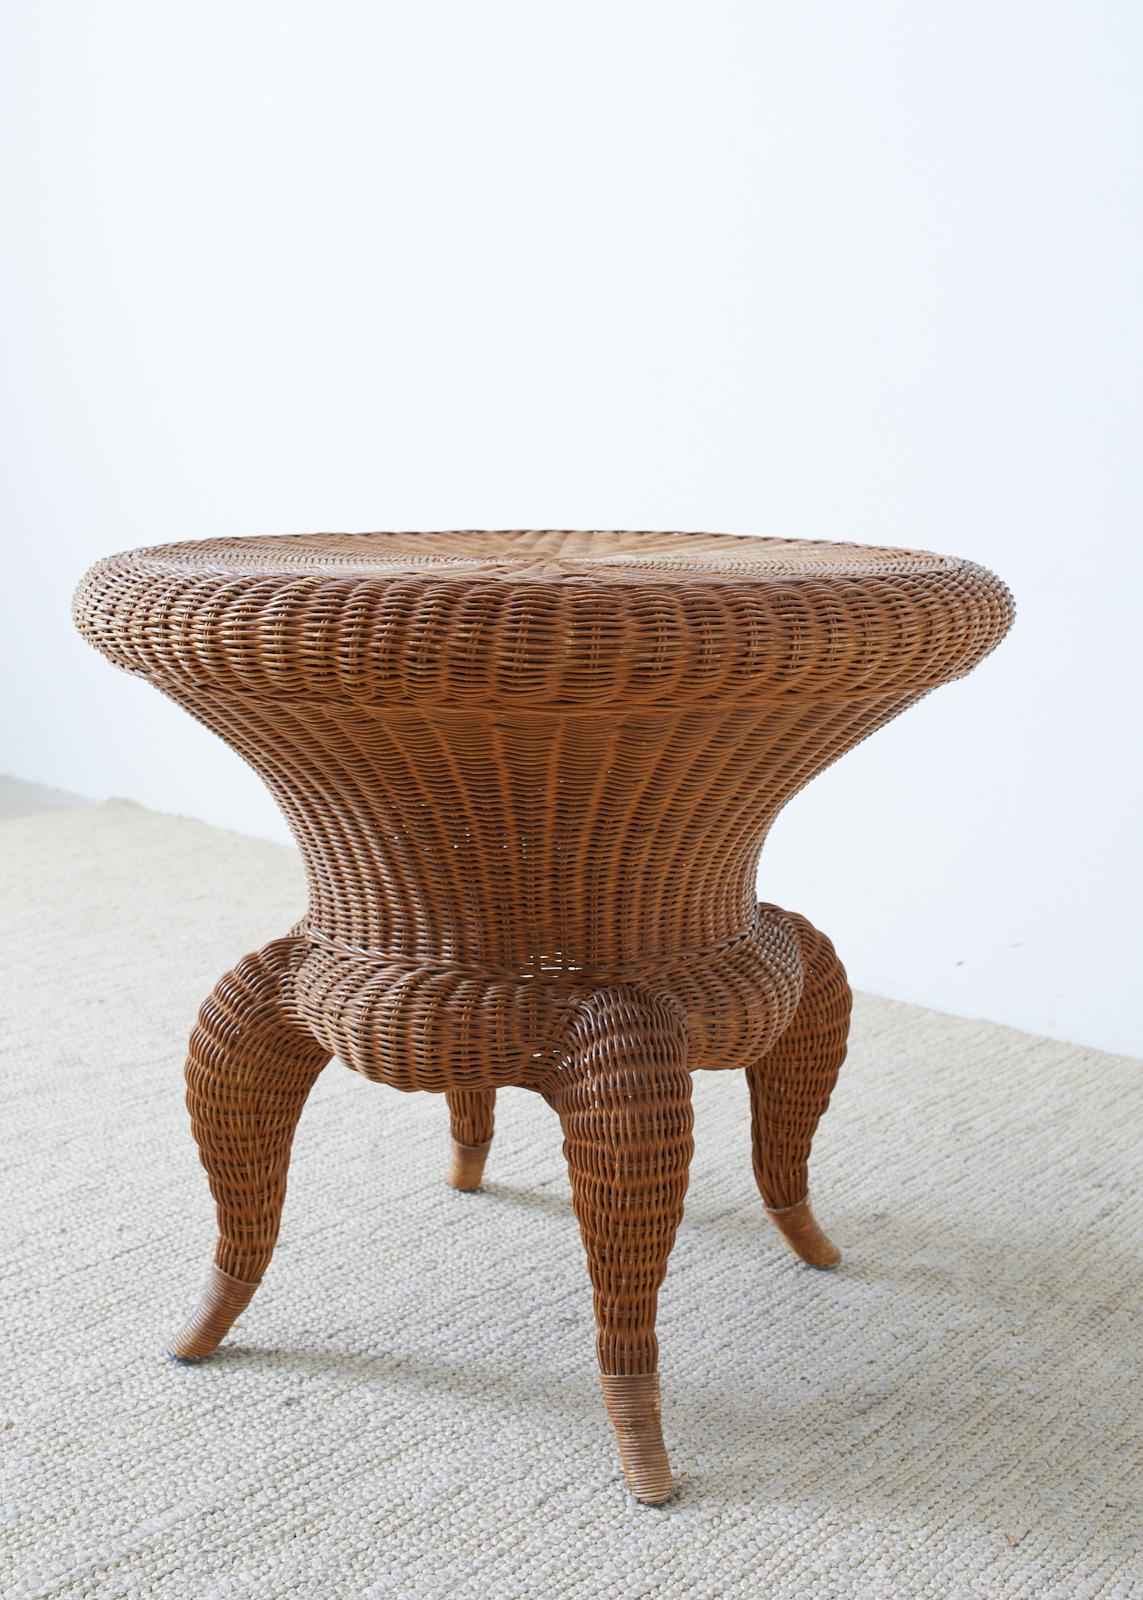 Wicker and Rattan Round Occasional or Center Table 2